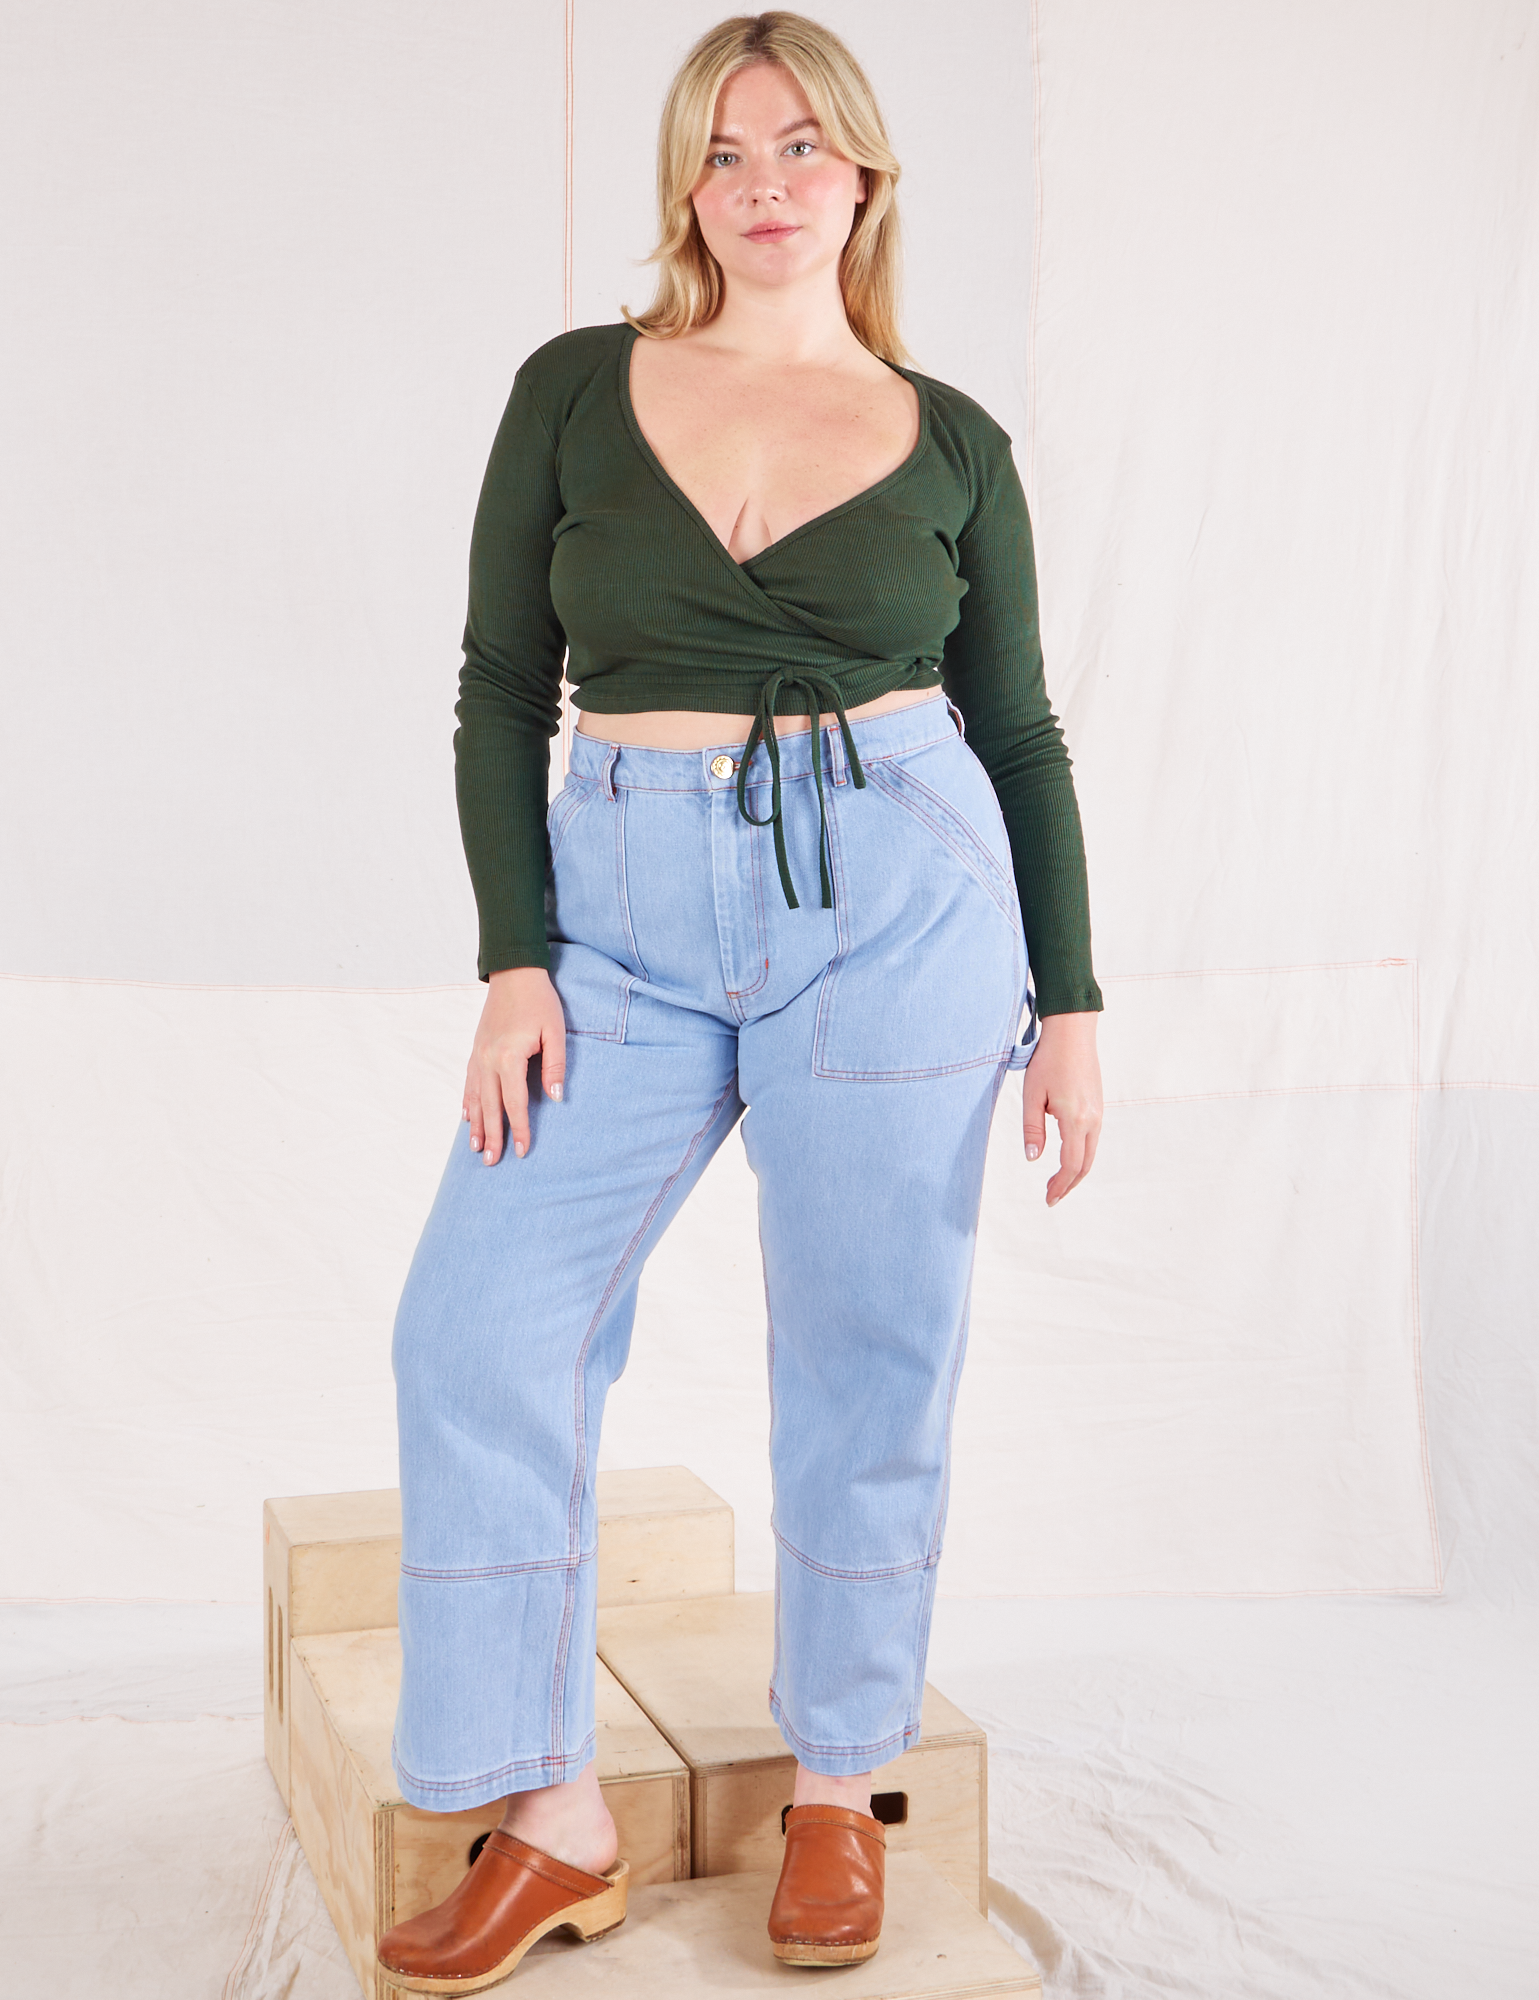 Lish is wearing Wrap Top in Swamp Green and light wash Carpenter Jeans